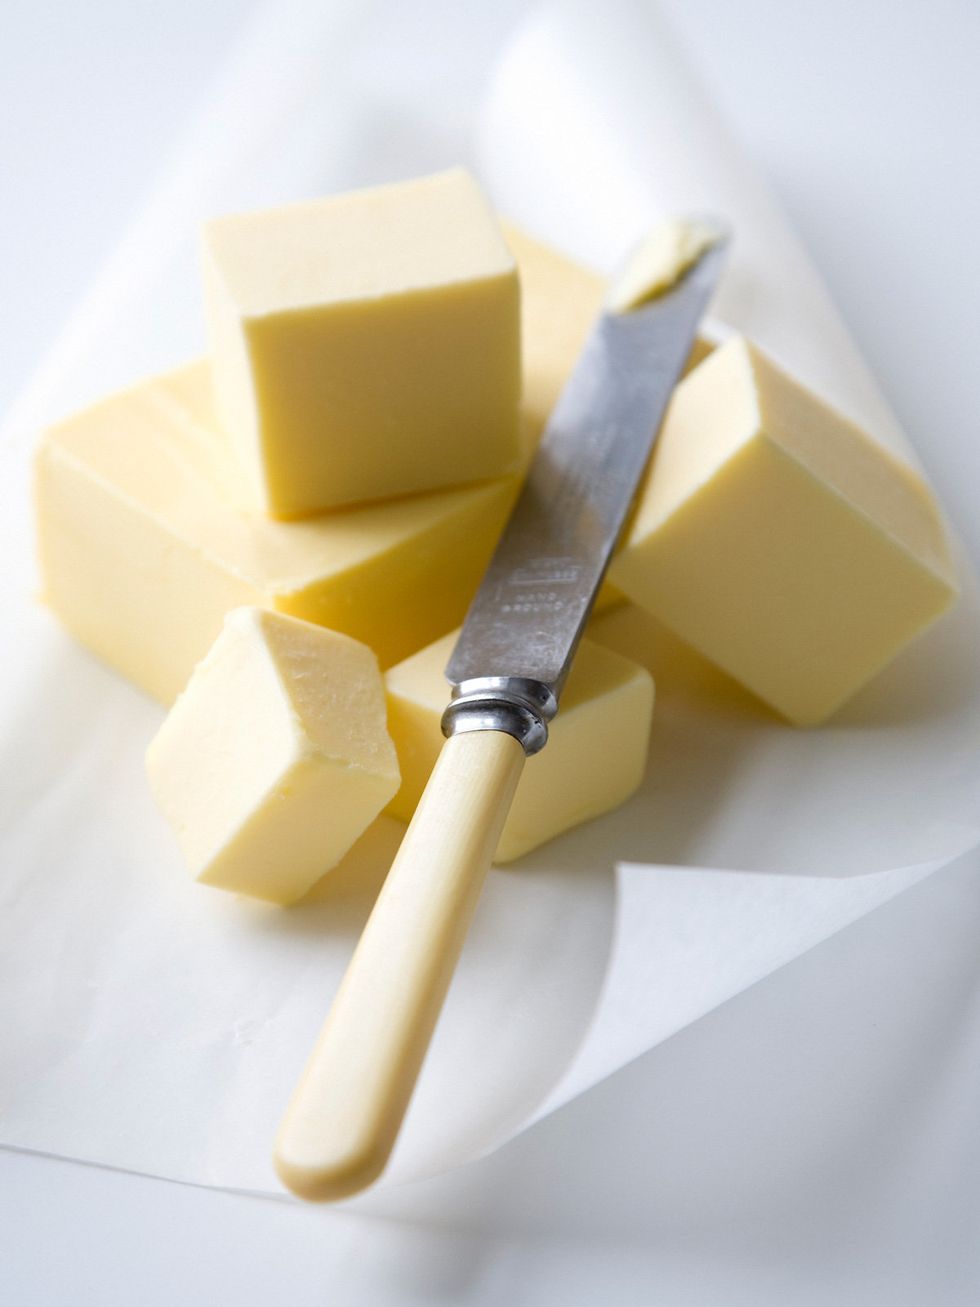 Food, Yellow, Ingredient, Cheese, Dairy, Processed cheese, Cuisine, Toma cheese, Sheep milk cheese, Limburger cheese, 